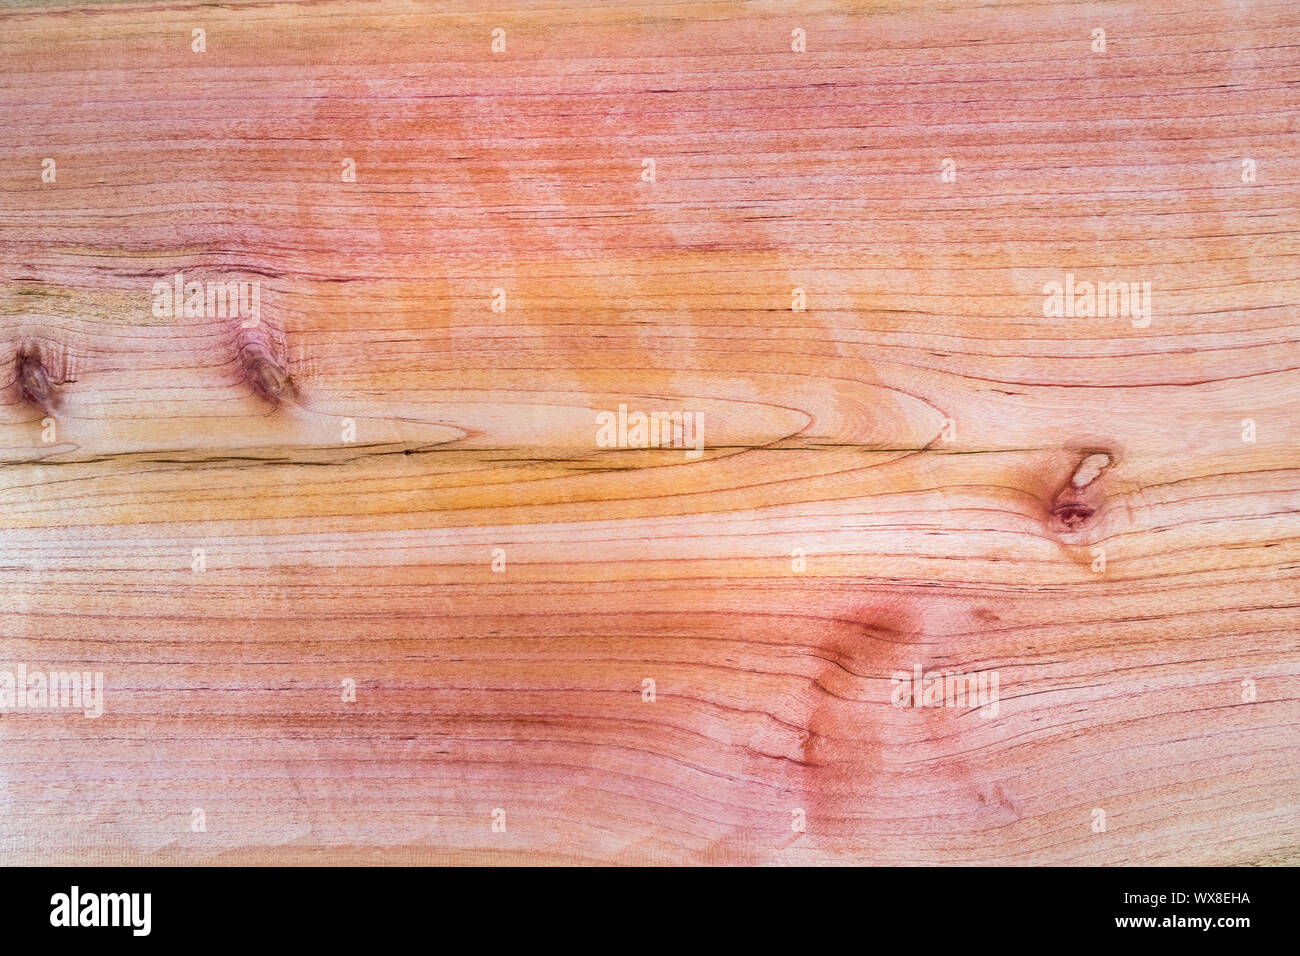 red toon wood texture Stock Photo